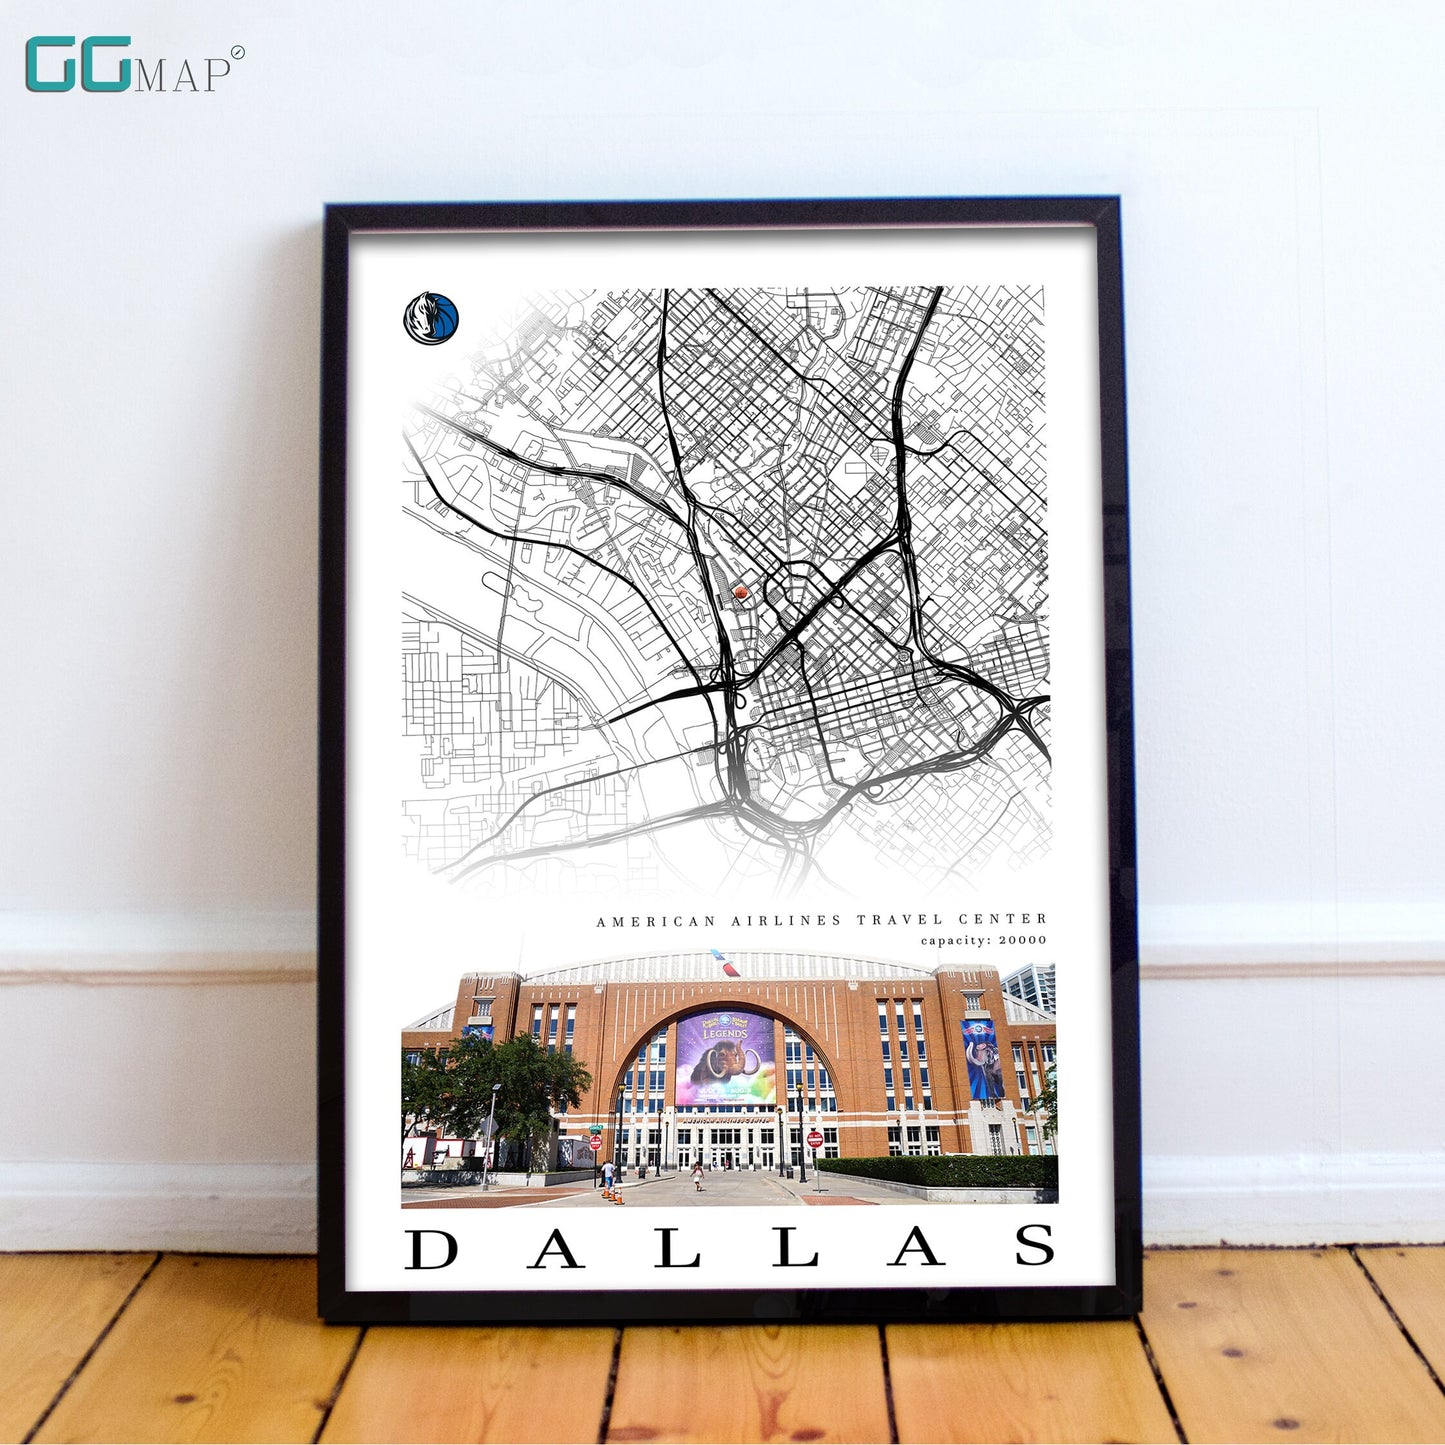 City map of DALLAS - American Airlines Travel Center - Home Decor Dallas - Dallas wall decor - Dallas poster - Dallas gift - Print map